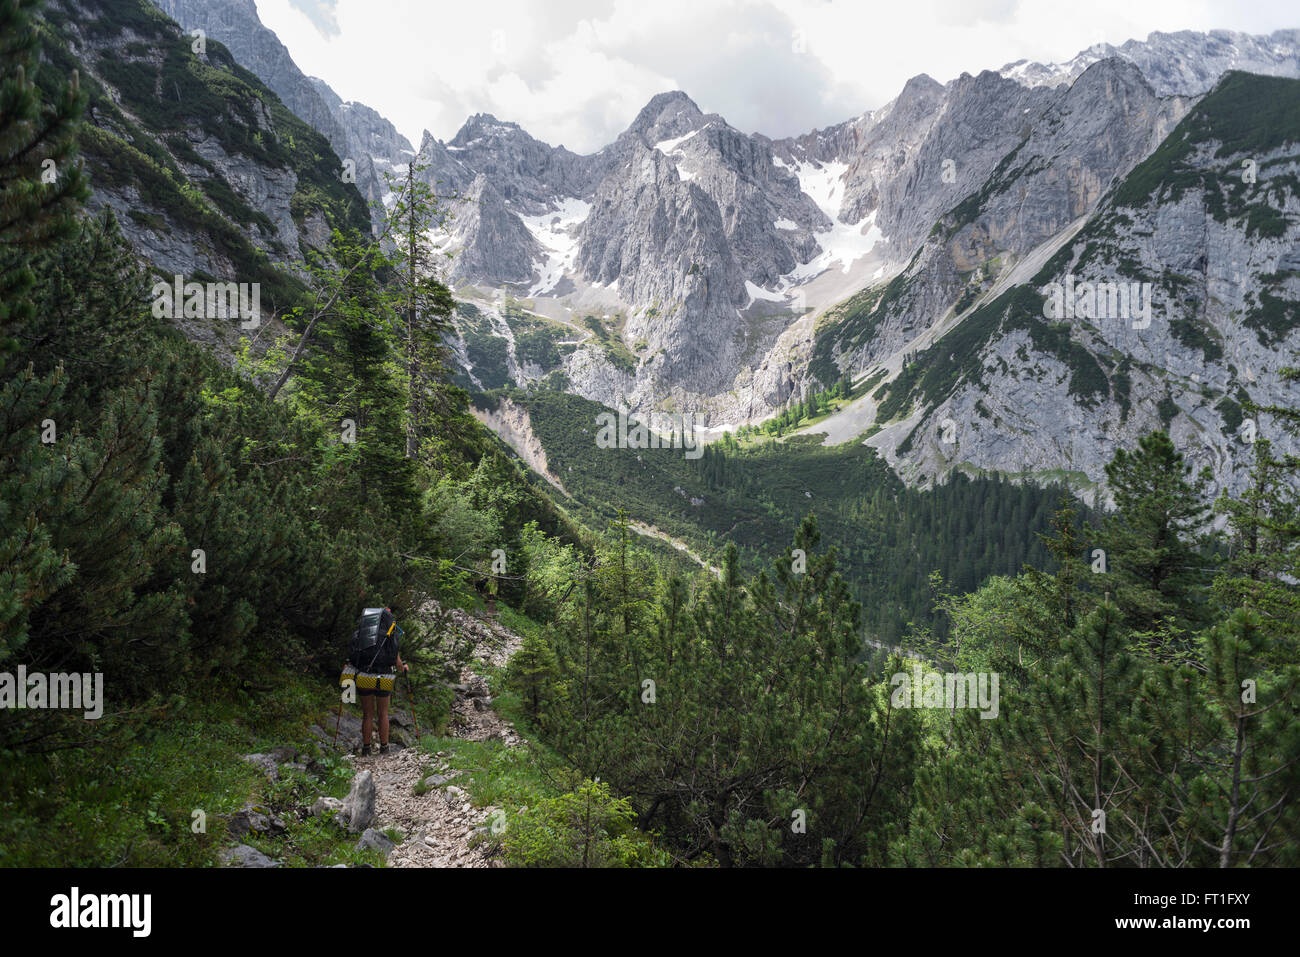 Female hiker on the descent from Mount Schachen into the Oberrein valley at the Wetterstein mountains, Bavaria, Germany Stock Photo